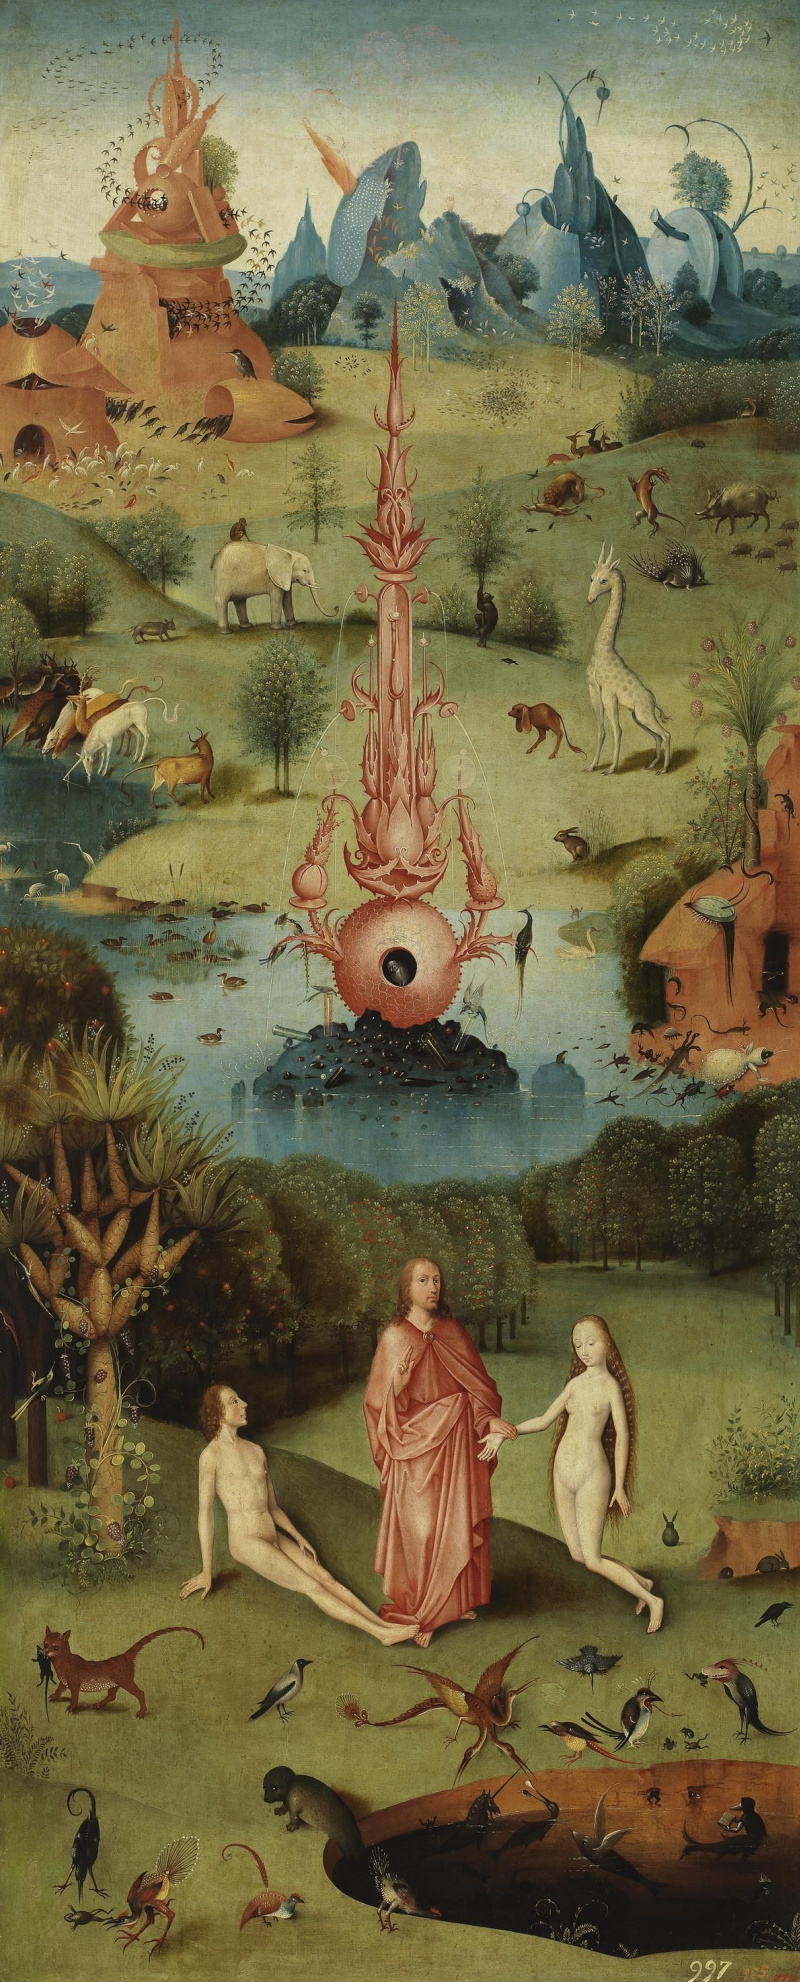  Hieronymus Bosch - The Creation of The World Print